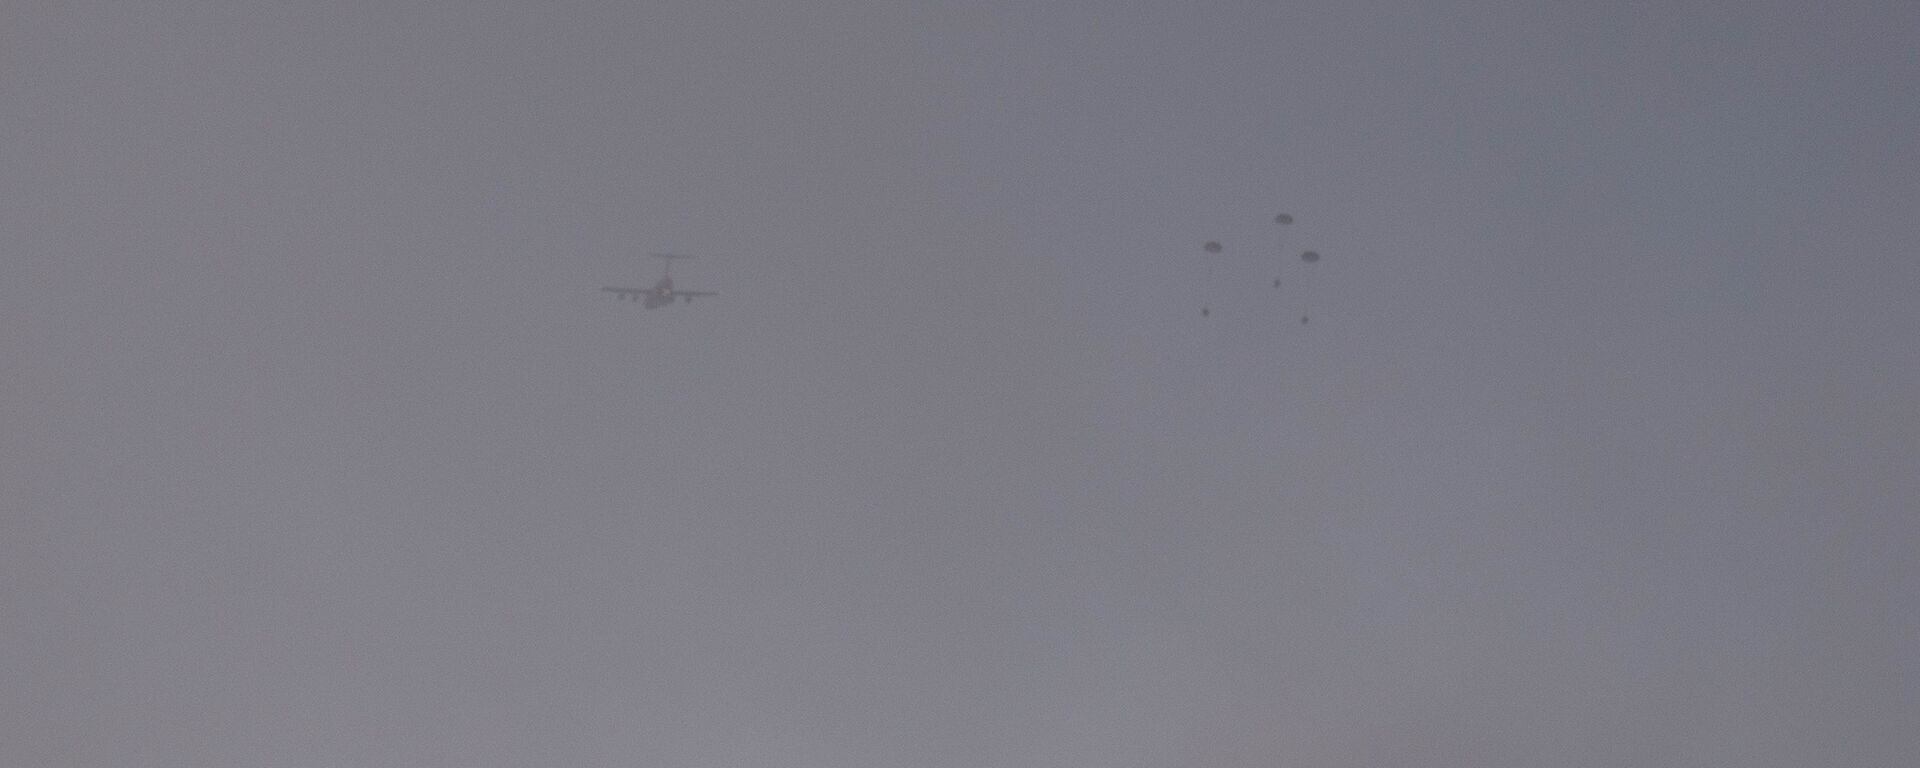 Silhouette of plane and three containers with parachutes drifting to the ground.